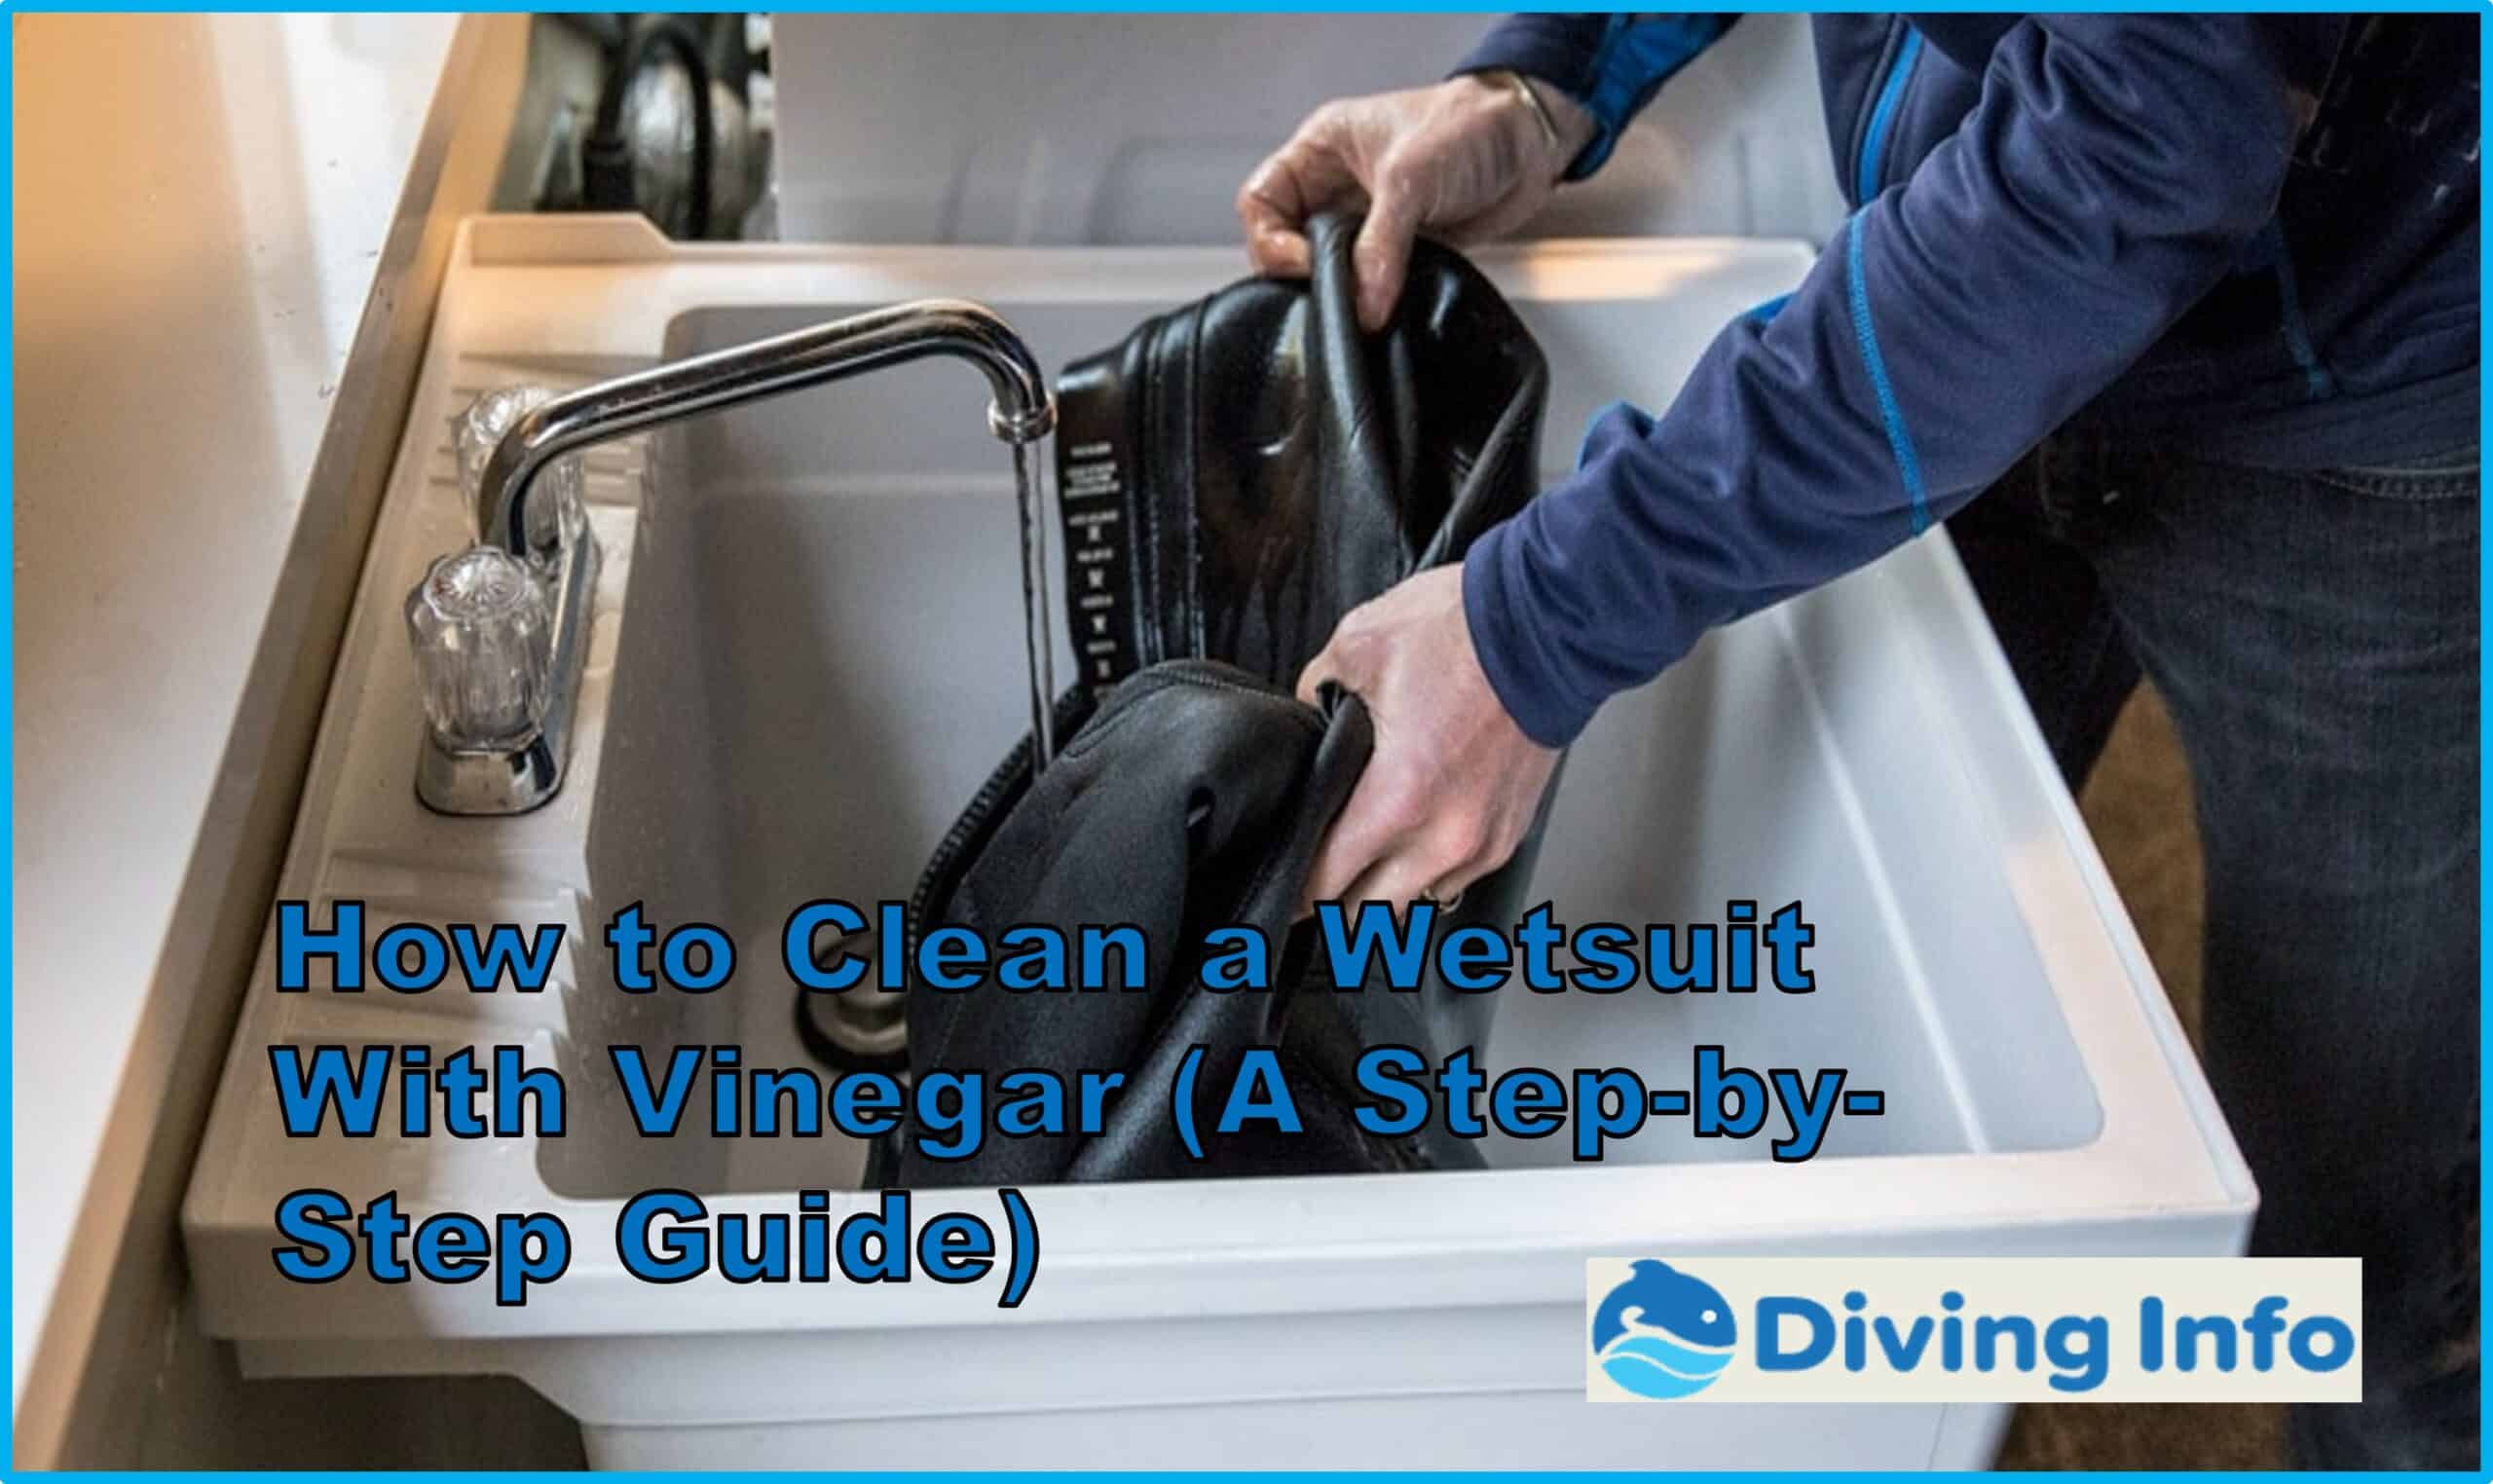 How to Clean a Wetsuit With Vinegar (A Step-by-Step Guide)